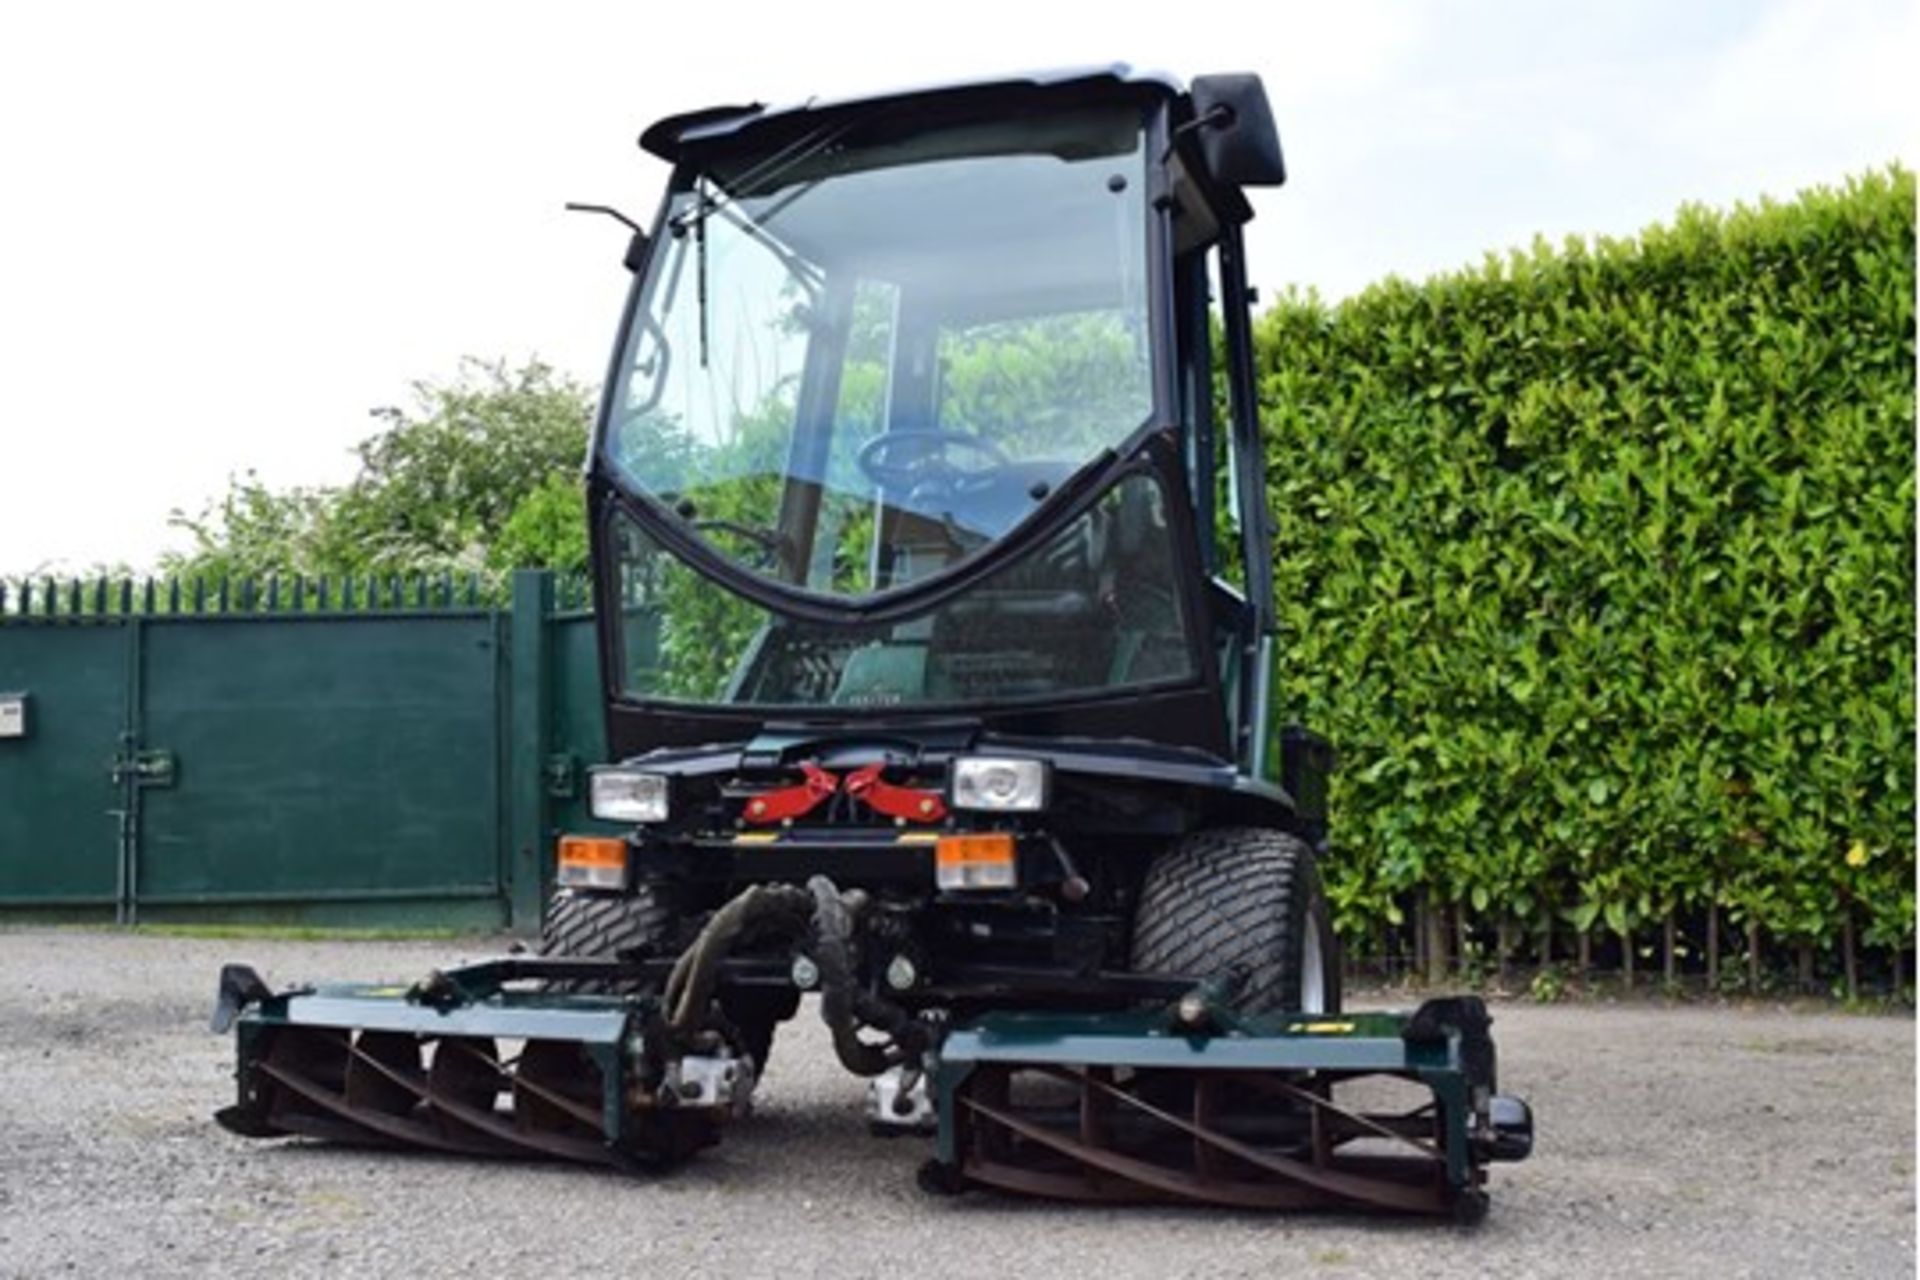 2010 Hayter LT324 Triple Cylinder Mower With Cab - Image 6 of 7